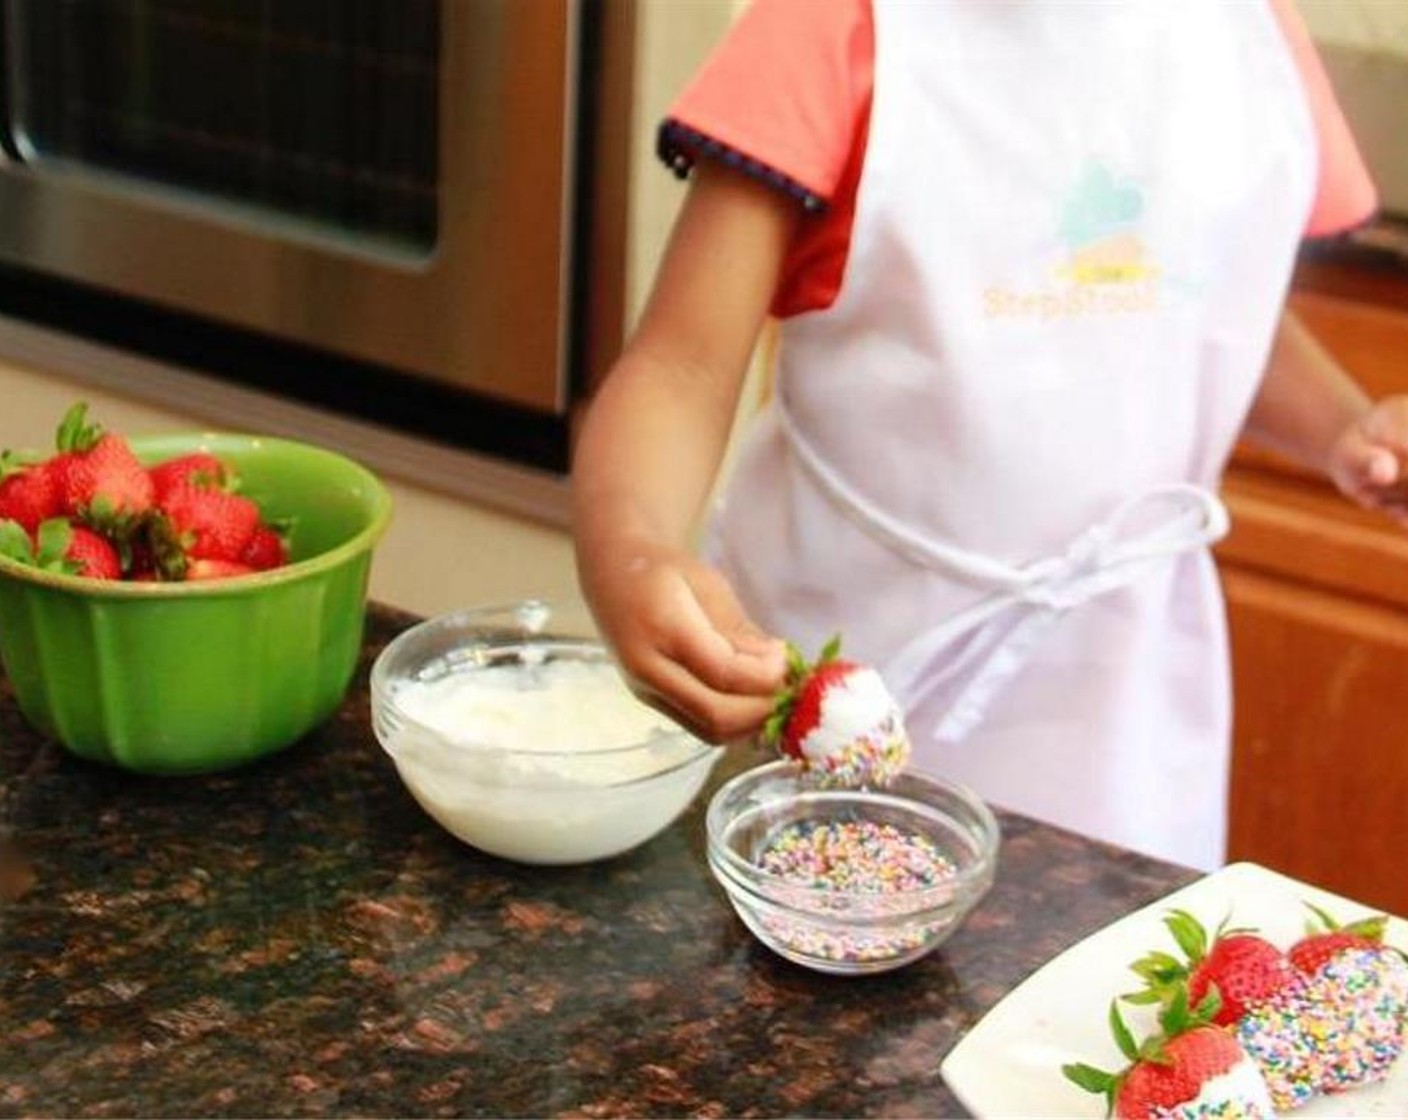 step 3 Dip the yogurt covered strawberry in small bowl of Sprinkles (1/3 cup).